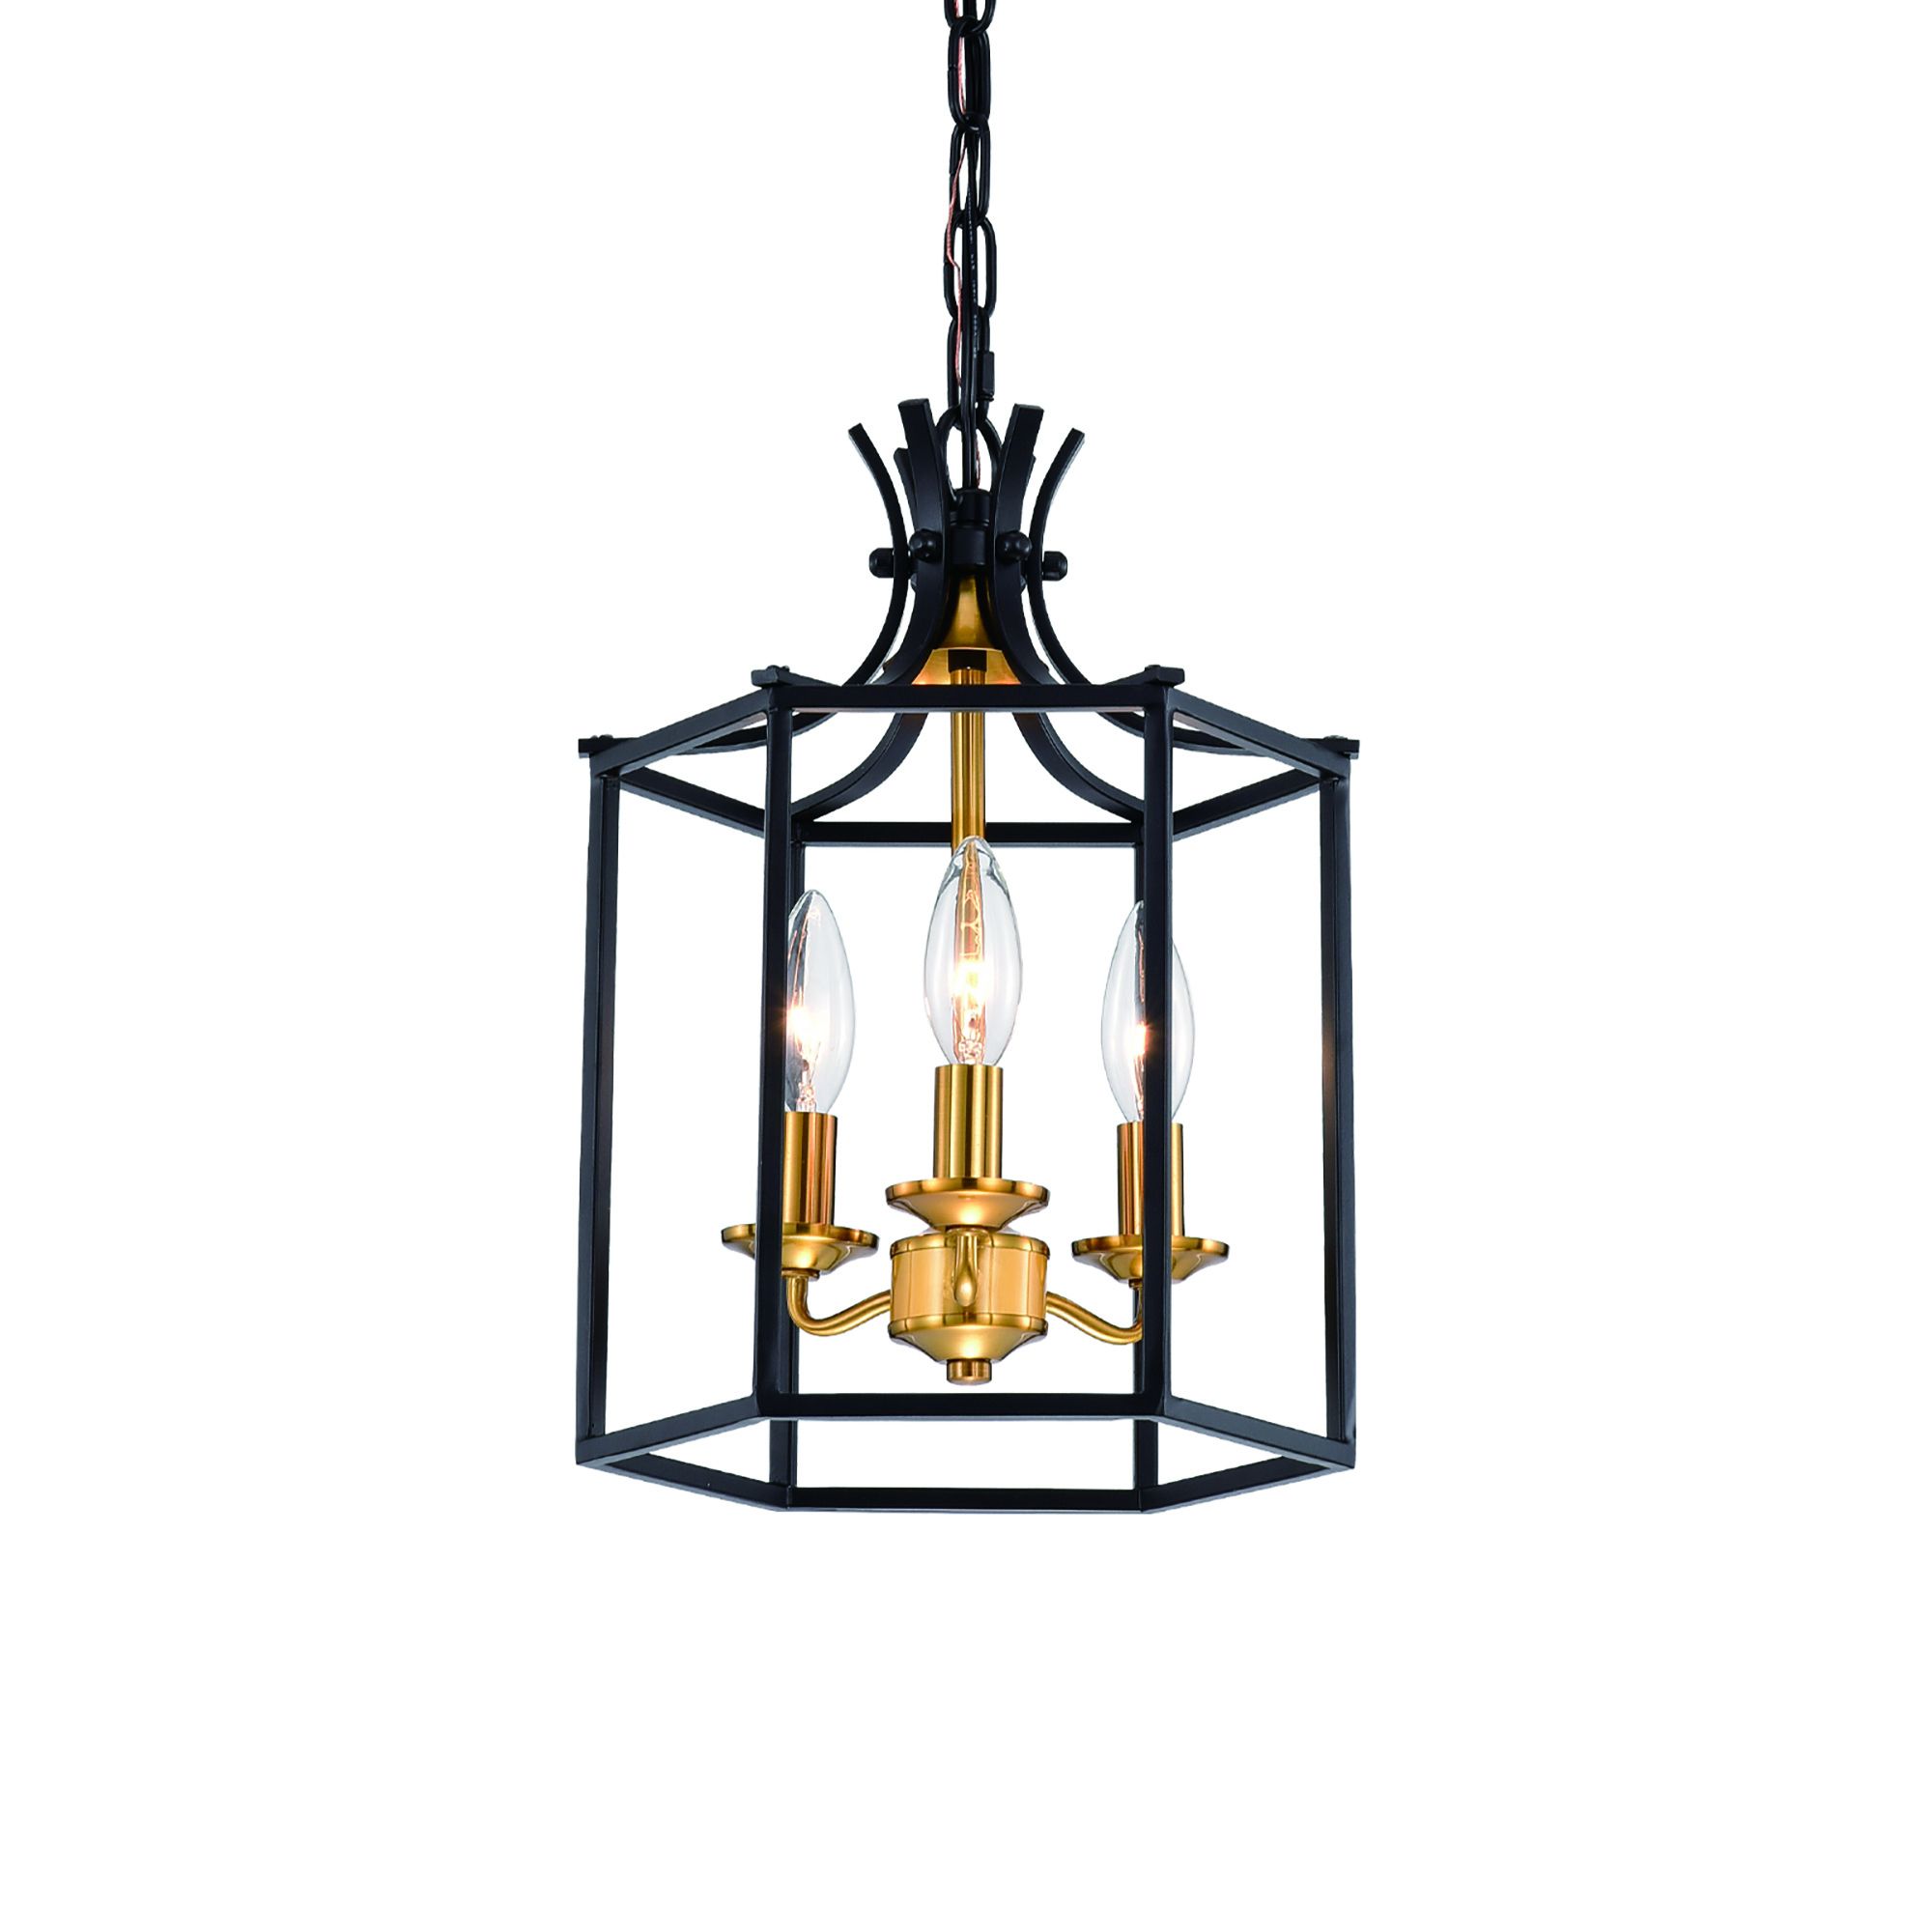 Antique Gold Lantern Chandeliers Throughout Preferred 3 Light Black And Antique Gold Lantern Statement Chandelier – Edvivi  Lighting (View 3 of 15)